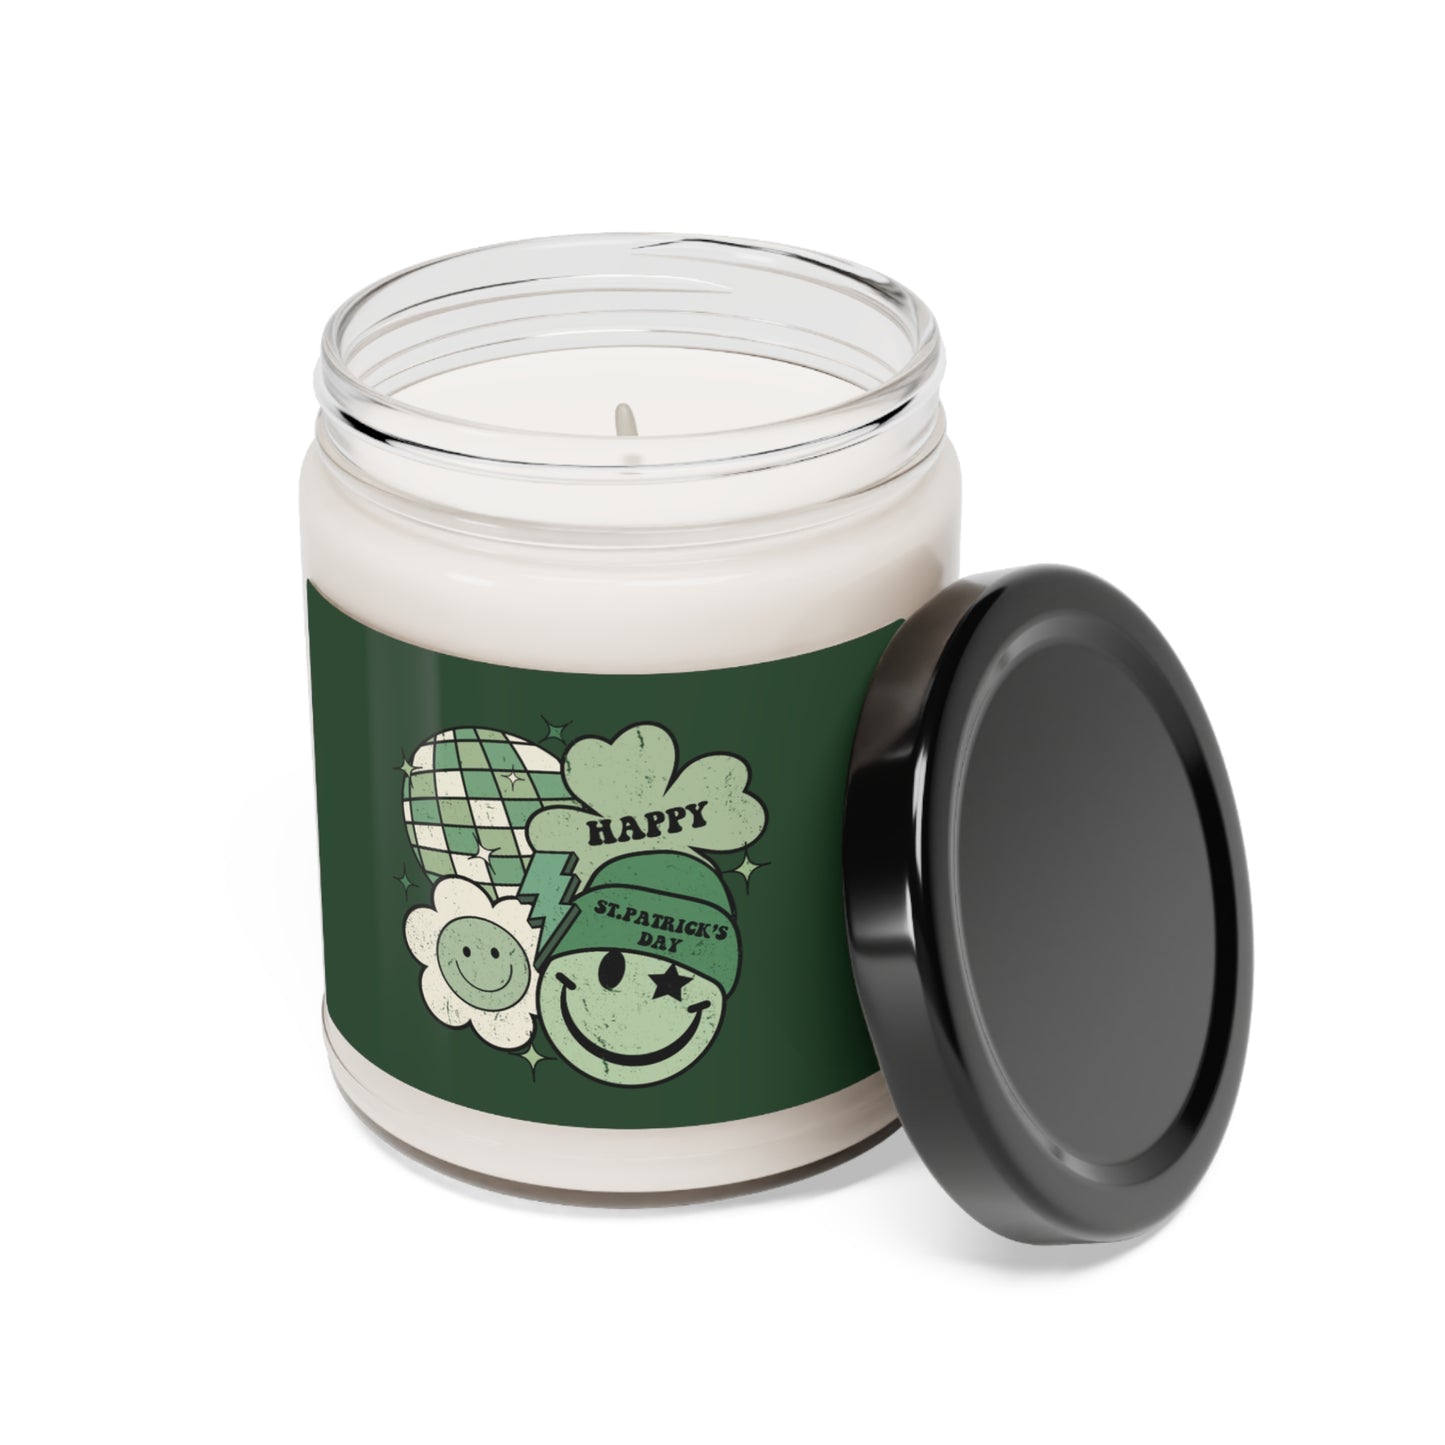 Groovy Smile St. Patrick's Day Scented Soy Candle, 9oz - Made in USA